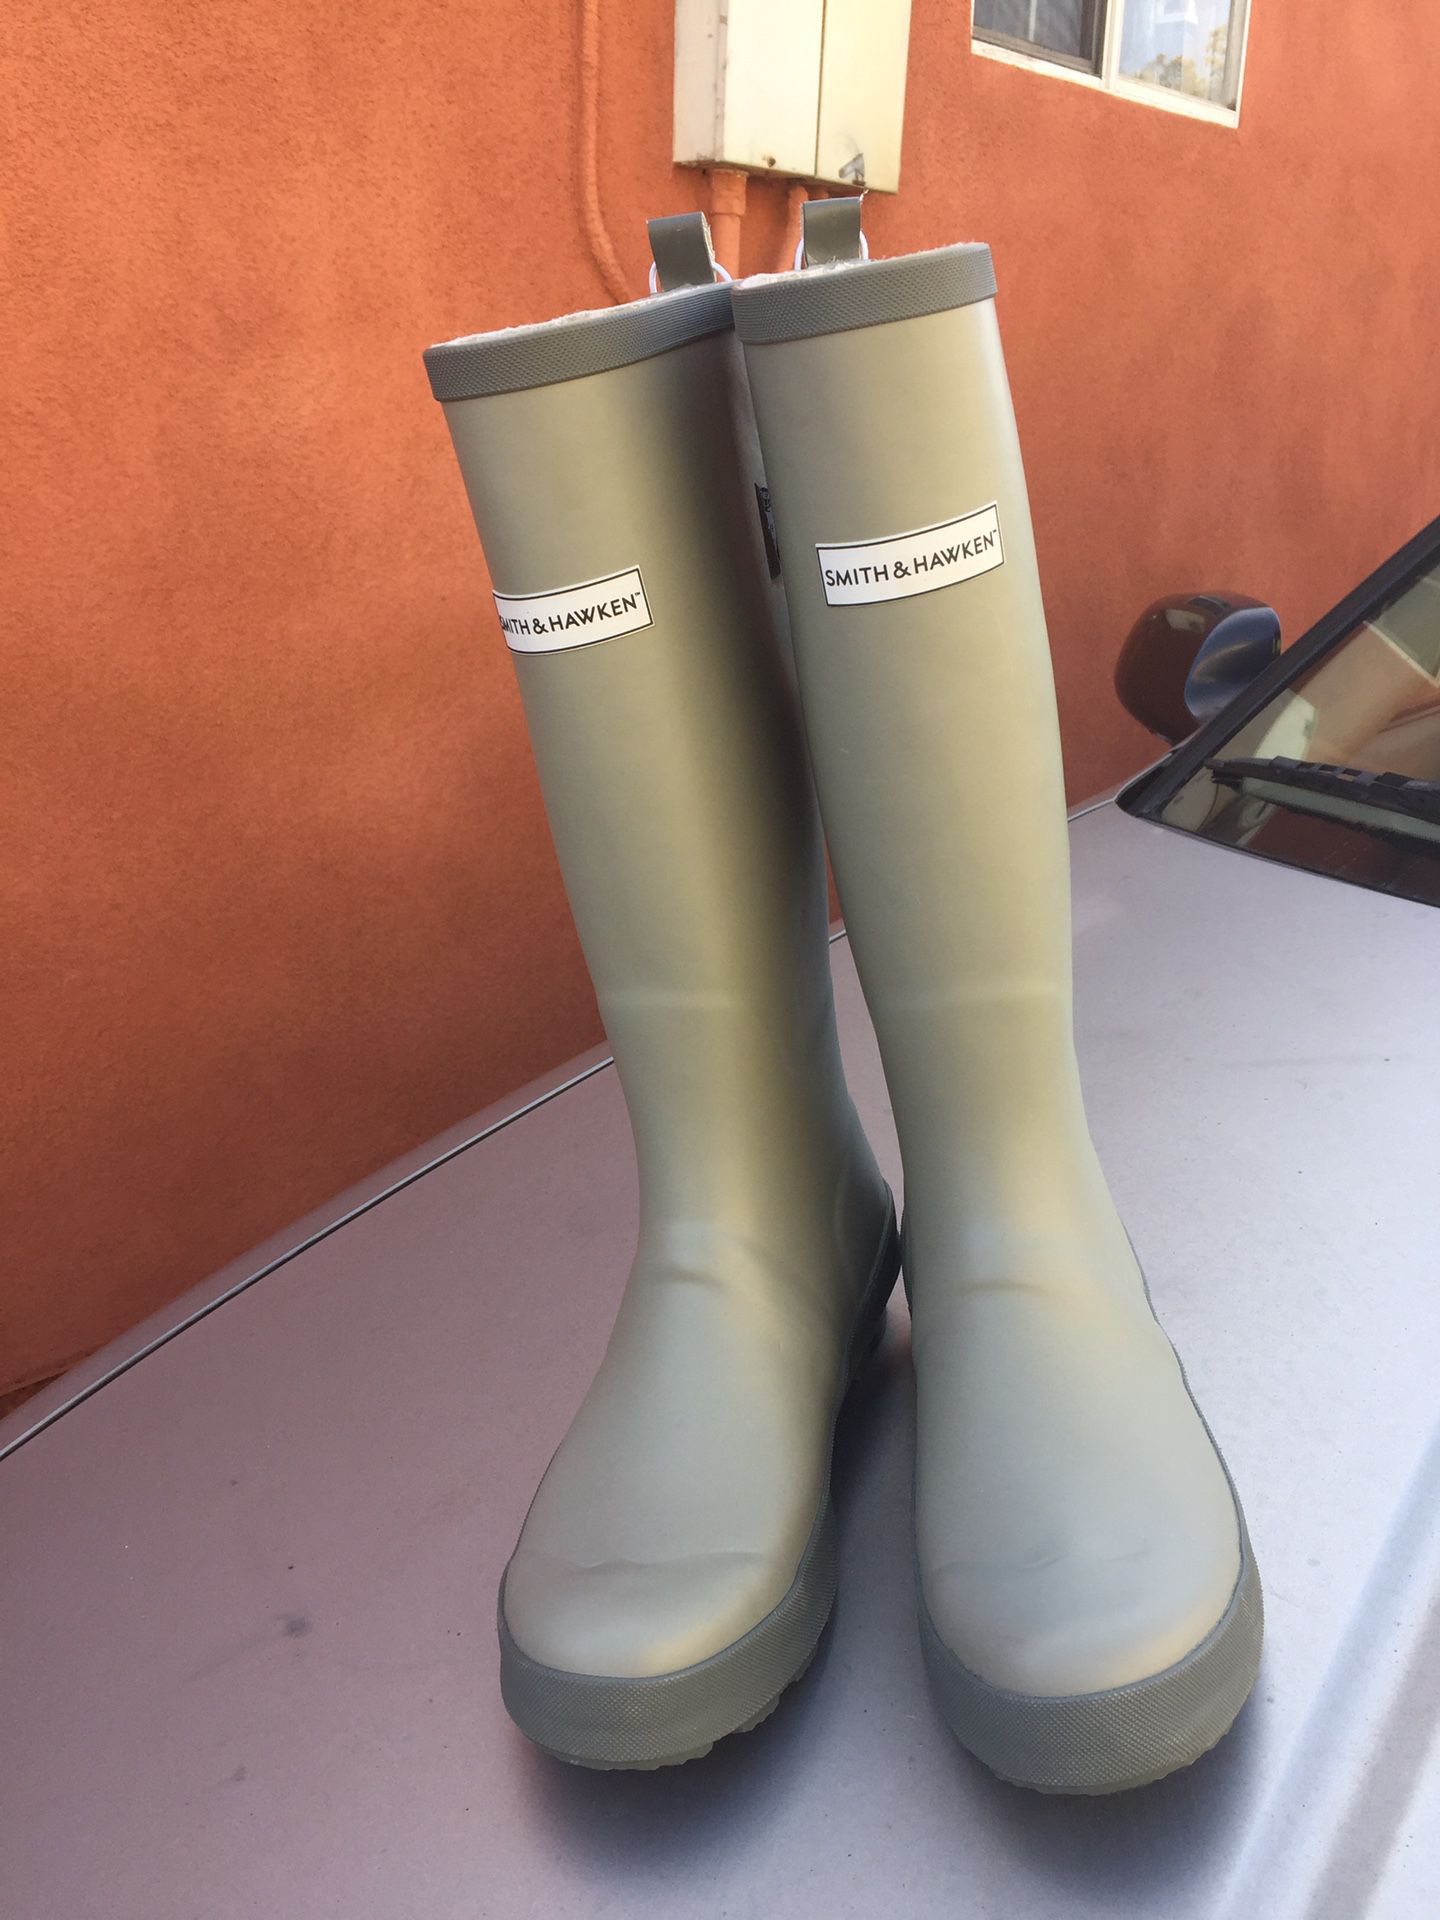 ONE PAIR IF RAIN BOOTS SMITH &HAWKENT size 8